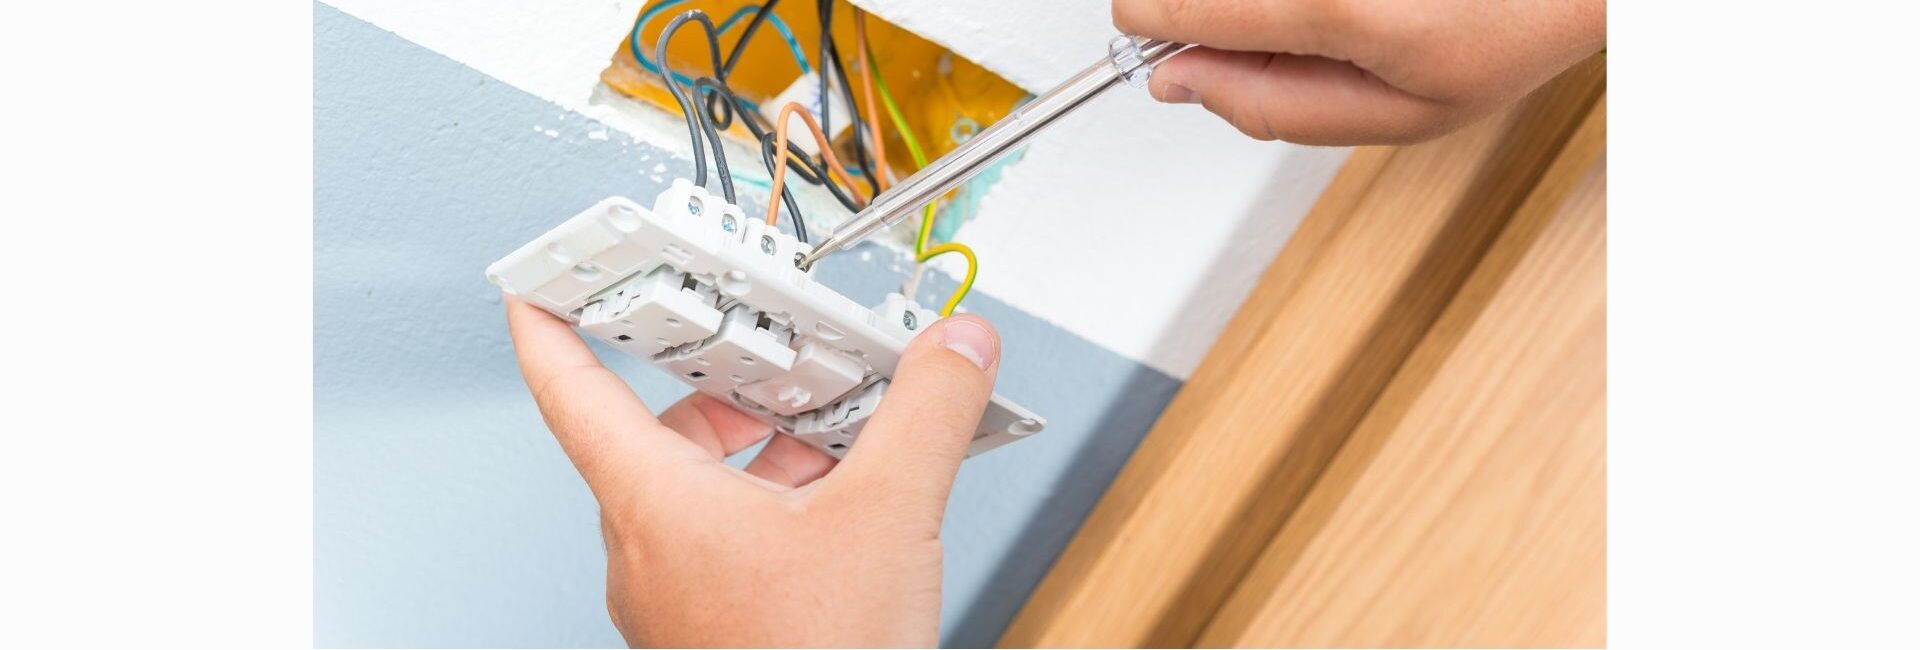 Khushi Electrical- Electrician Services in Noida,